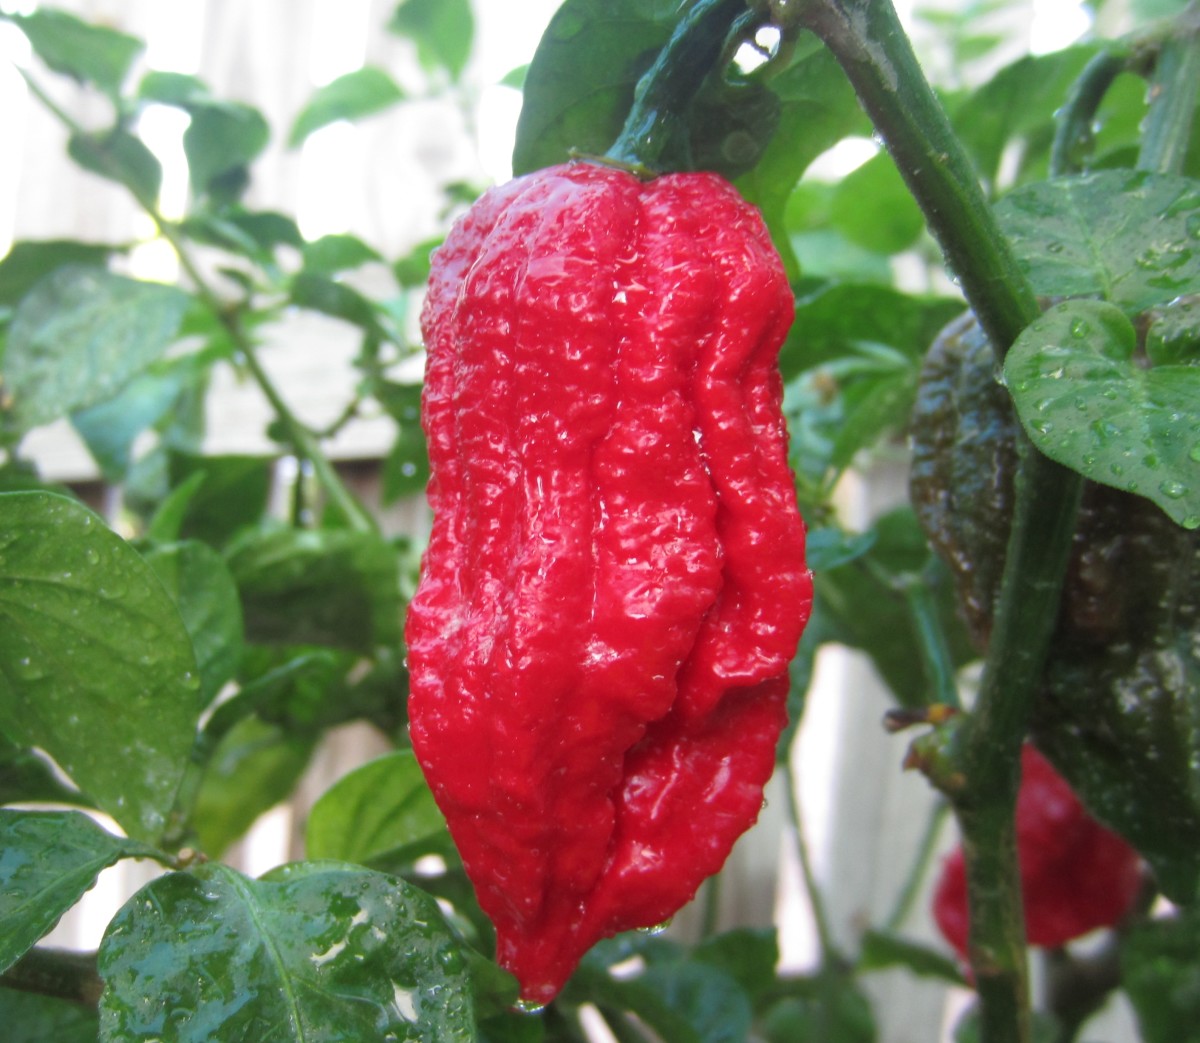 The spicy 7 Pot Barrackpore pepper